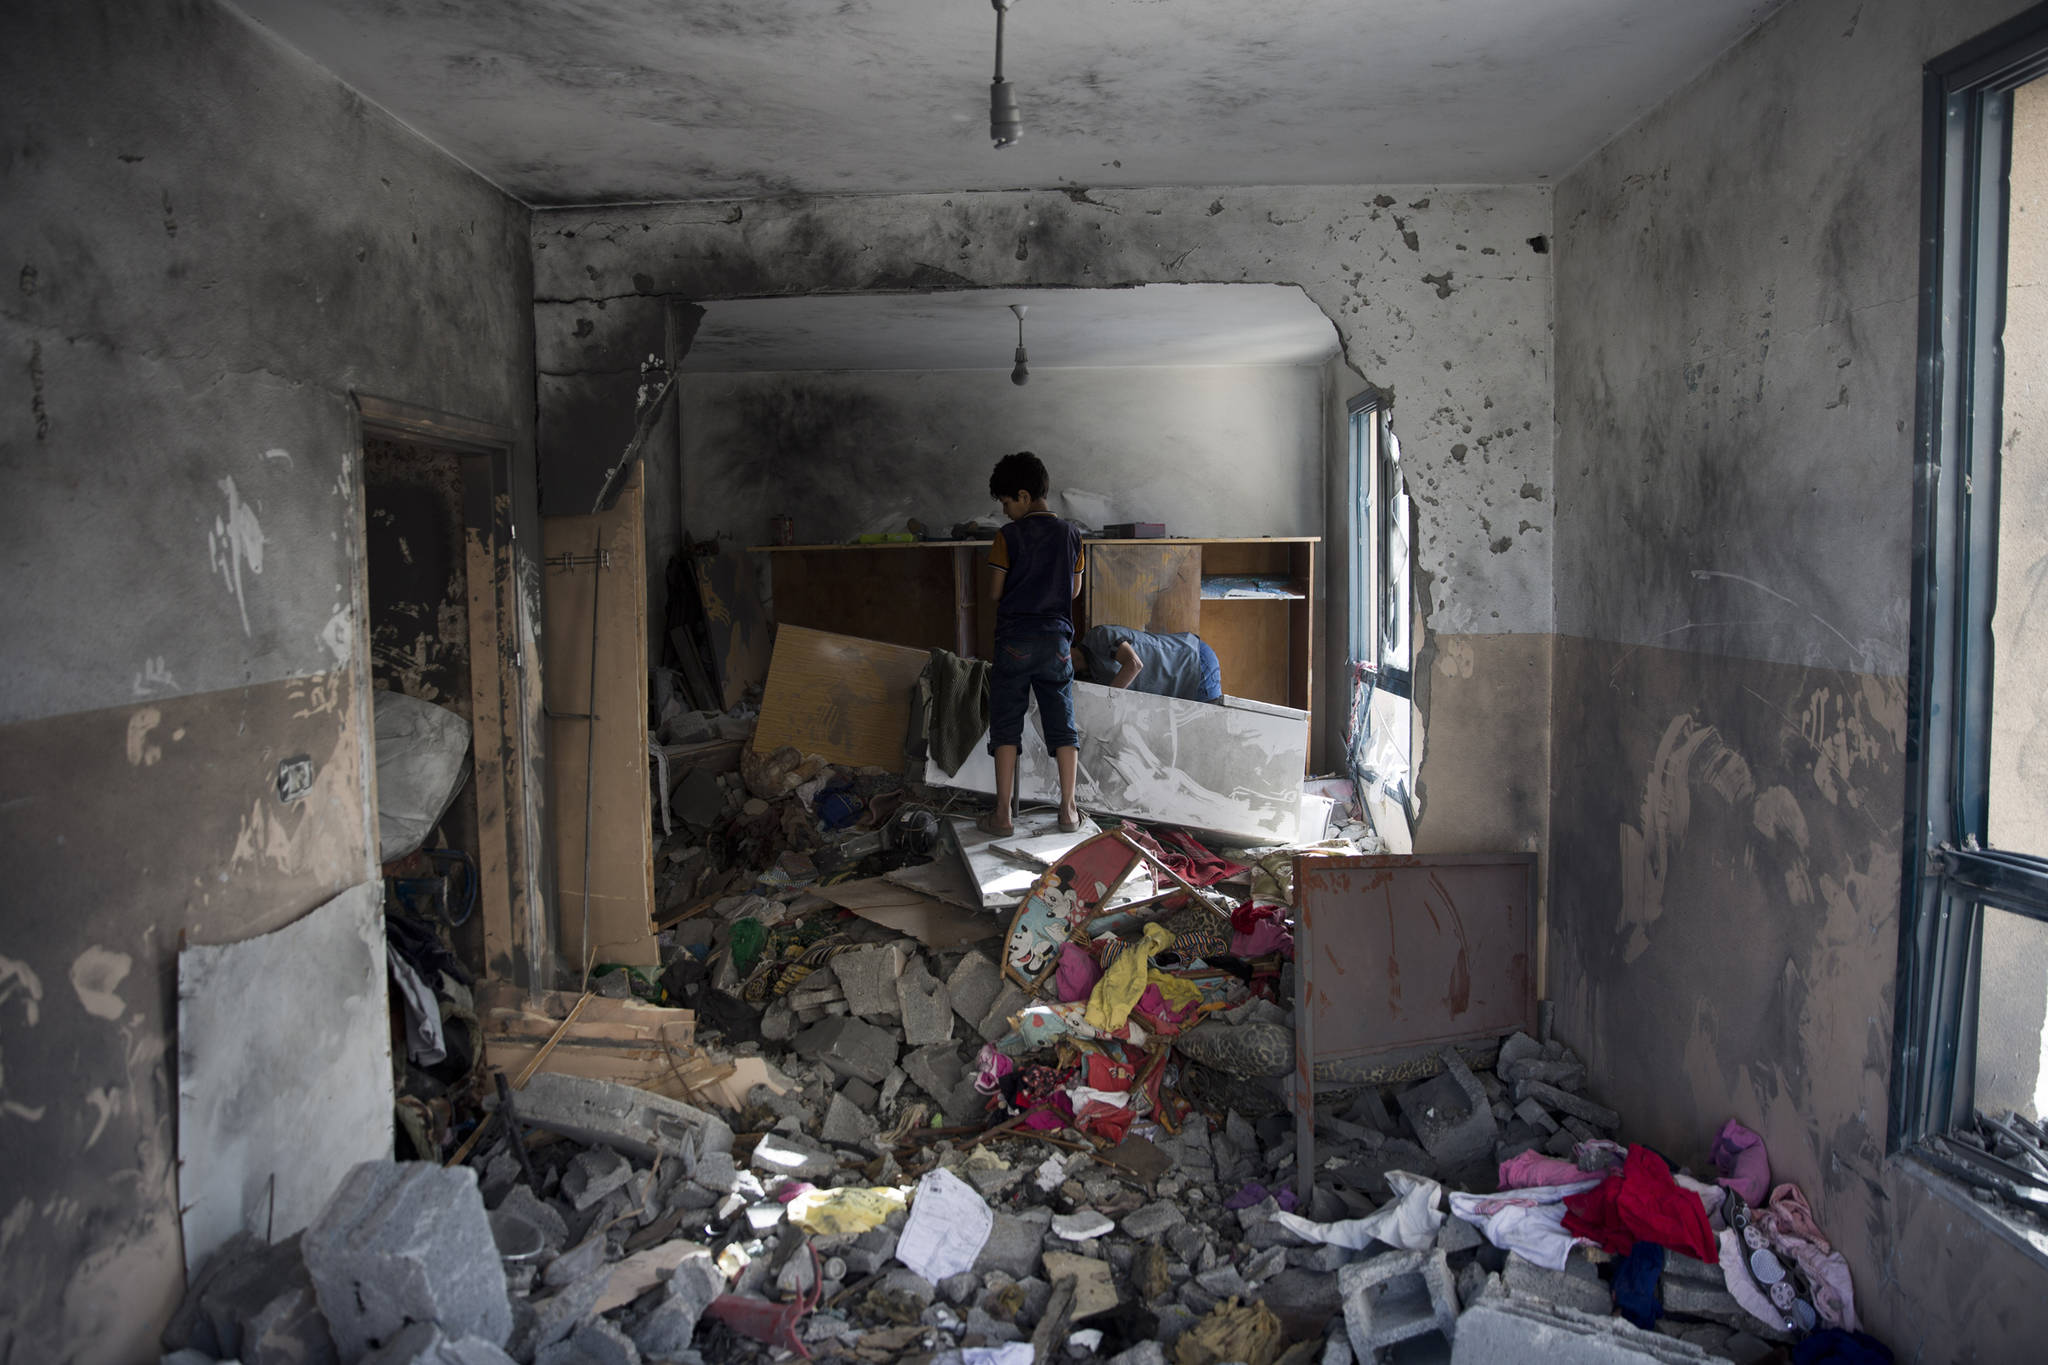 Palestinians inspect a damaged bedroom following a late night Israeli missile strike on a building in town of Beit Lahiya, Northern Gaza Strip on Monday, May, 6, 2019. The Israeli military has lifted protective restrictions on residents in southern Israel while Gaza’s ruling Hamas militant group reported a cease-fire deal had been reached to end the deadliest fighting between the two sides since a 2014 war. (Khalil Hamra | Associated Press)